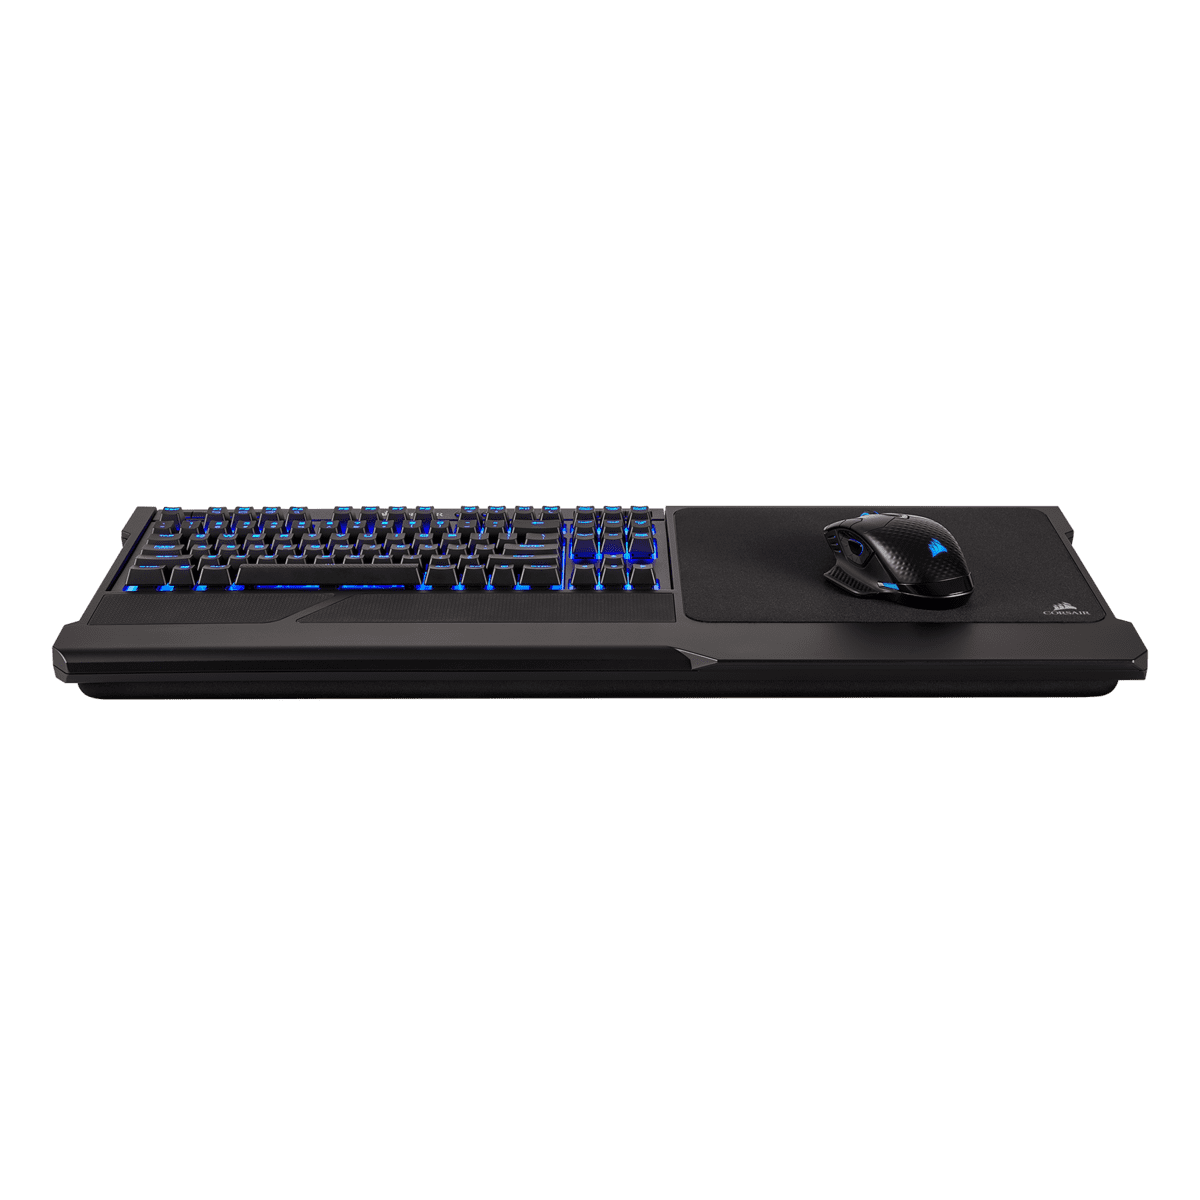 Corsair at CES 2018: Wireless K63 Mechanical Keyboard with Accompanying Lap  Board